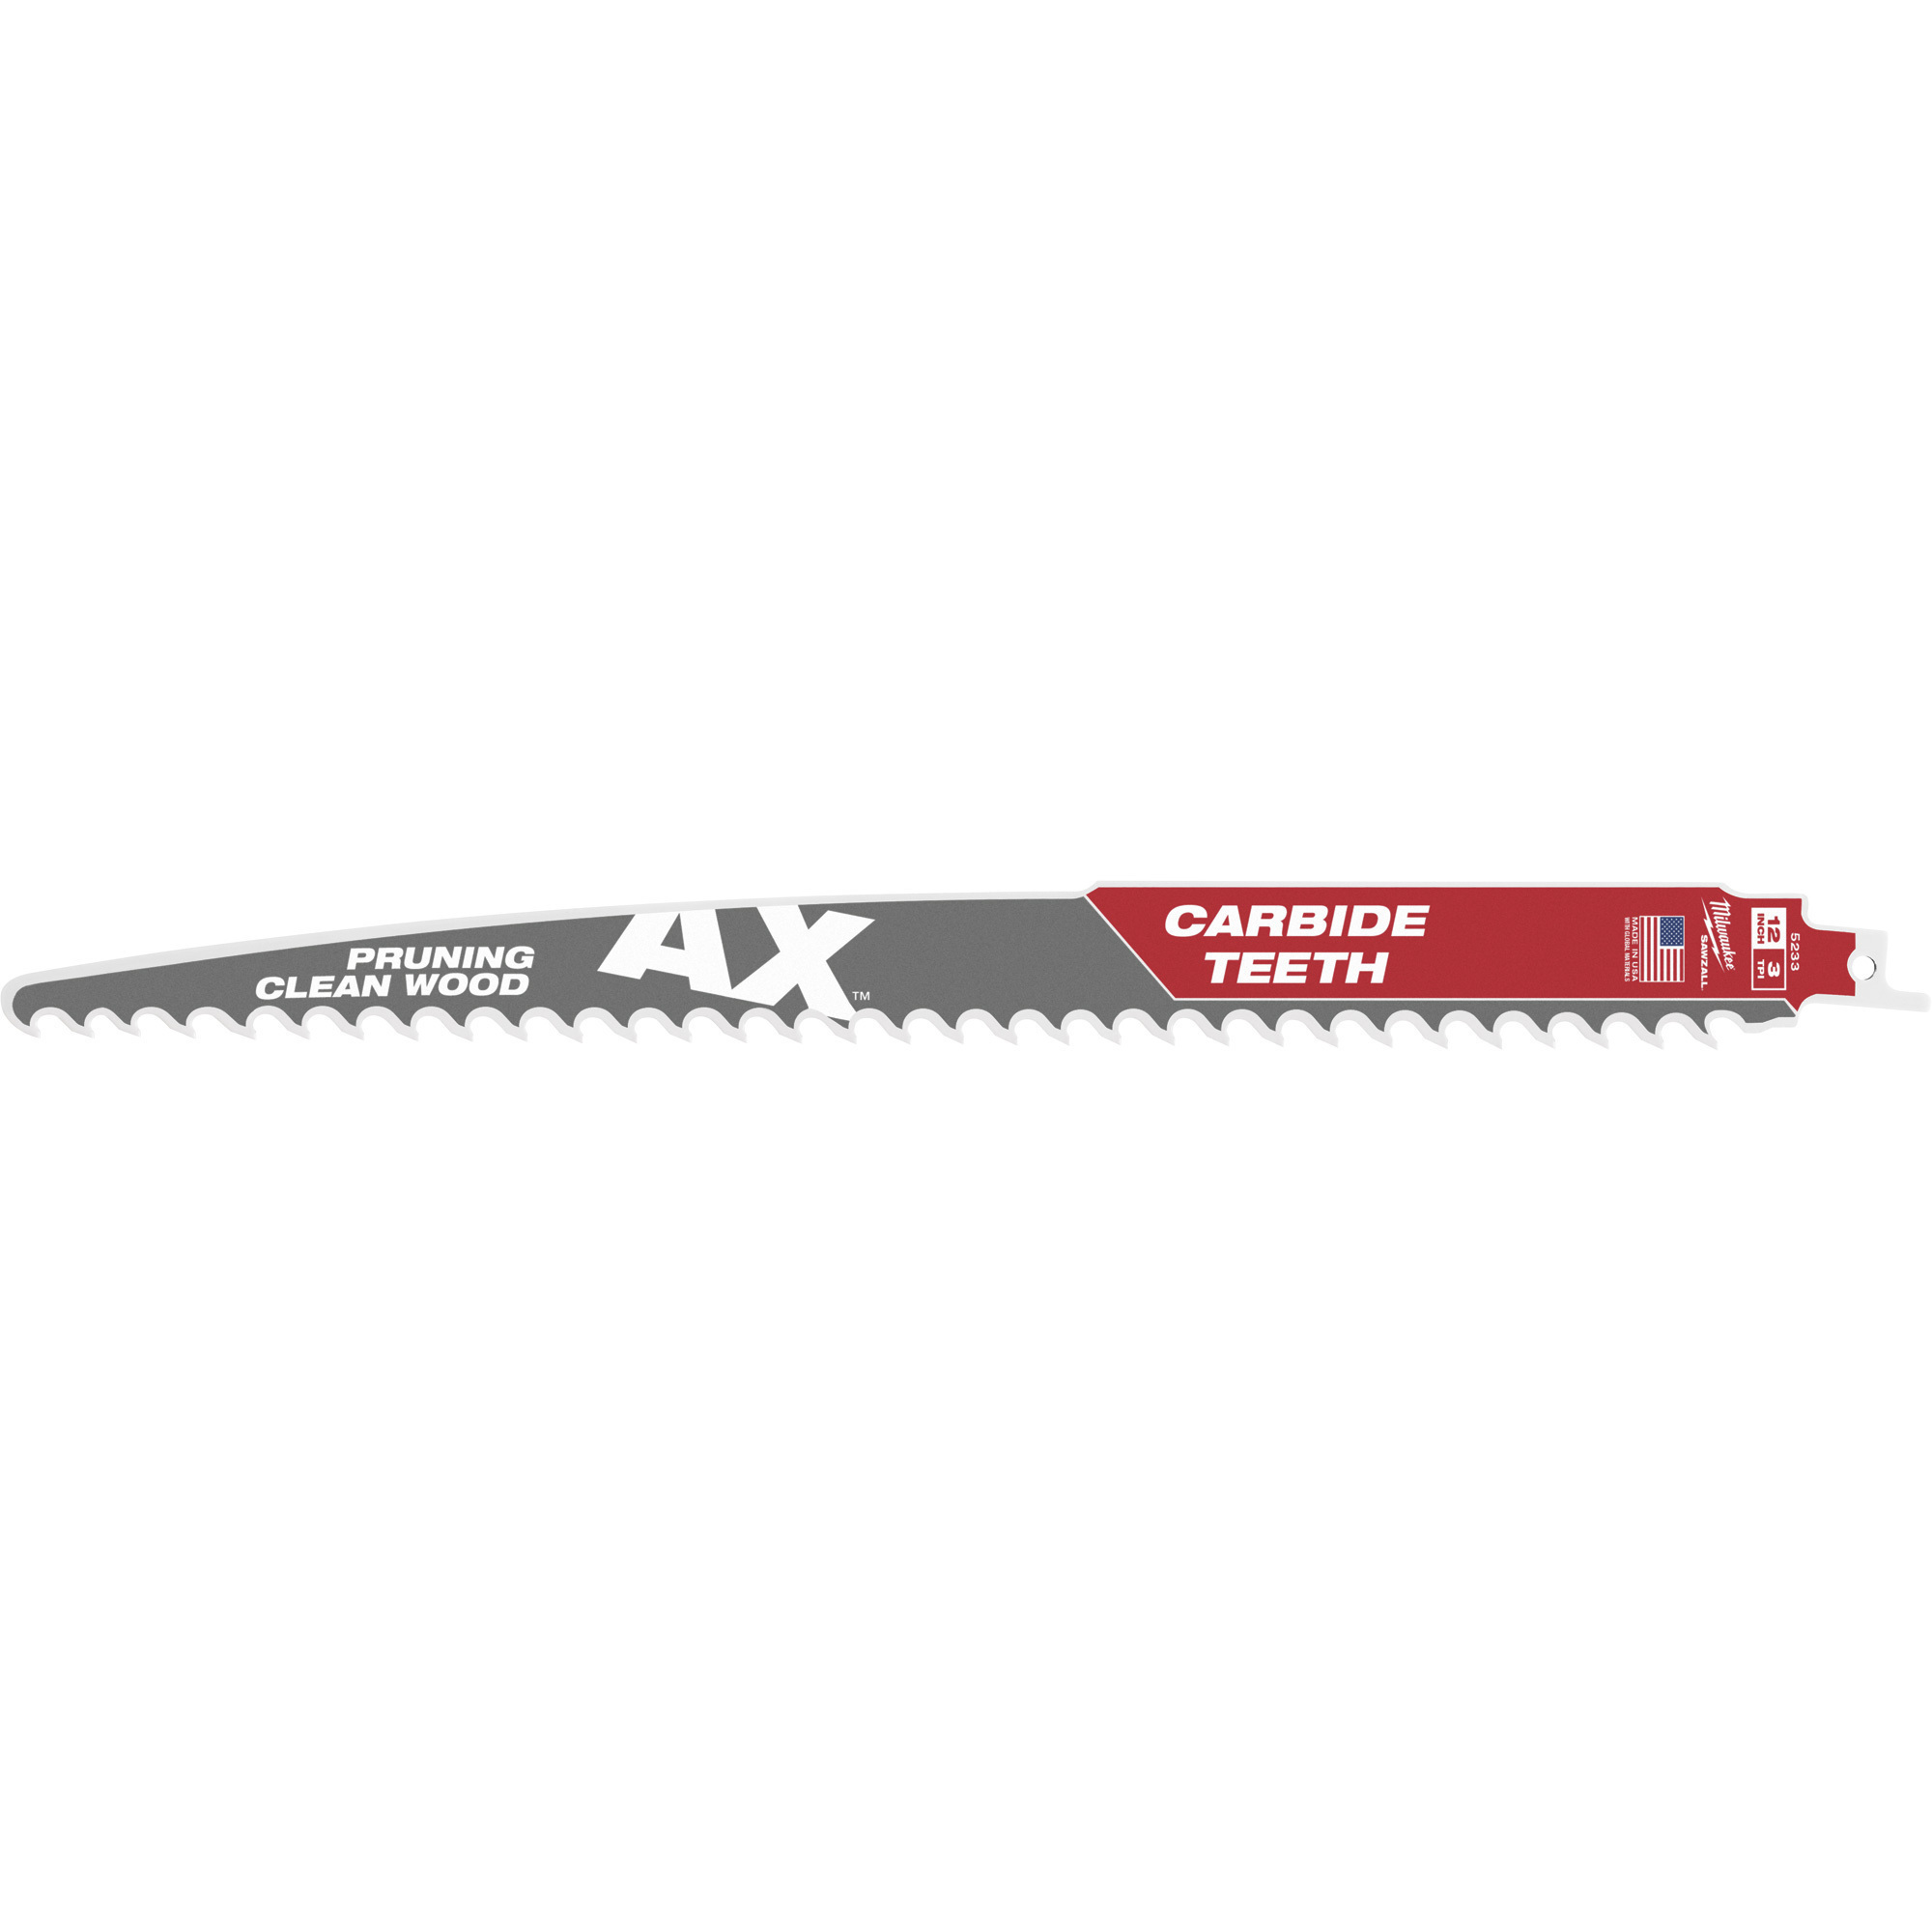 Milwaukee AX with Carbide Teeth for Pruning Clean Wood Sawzall Blades, 12Inch L, 3 TPI, Model 48-00-5233